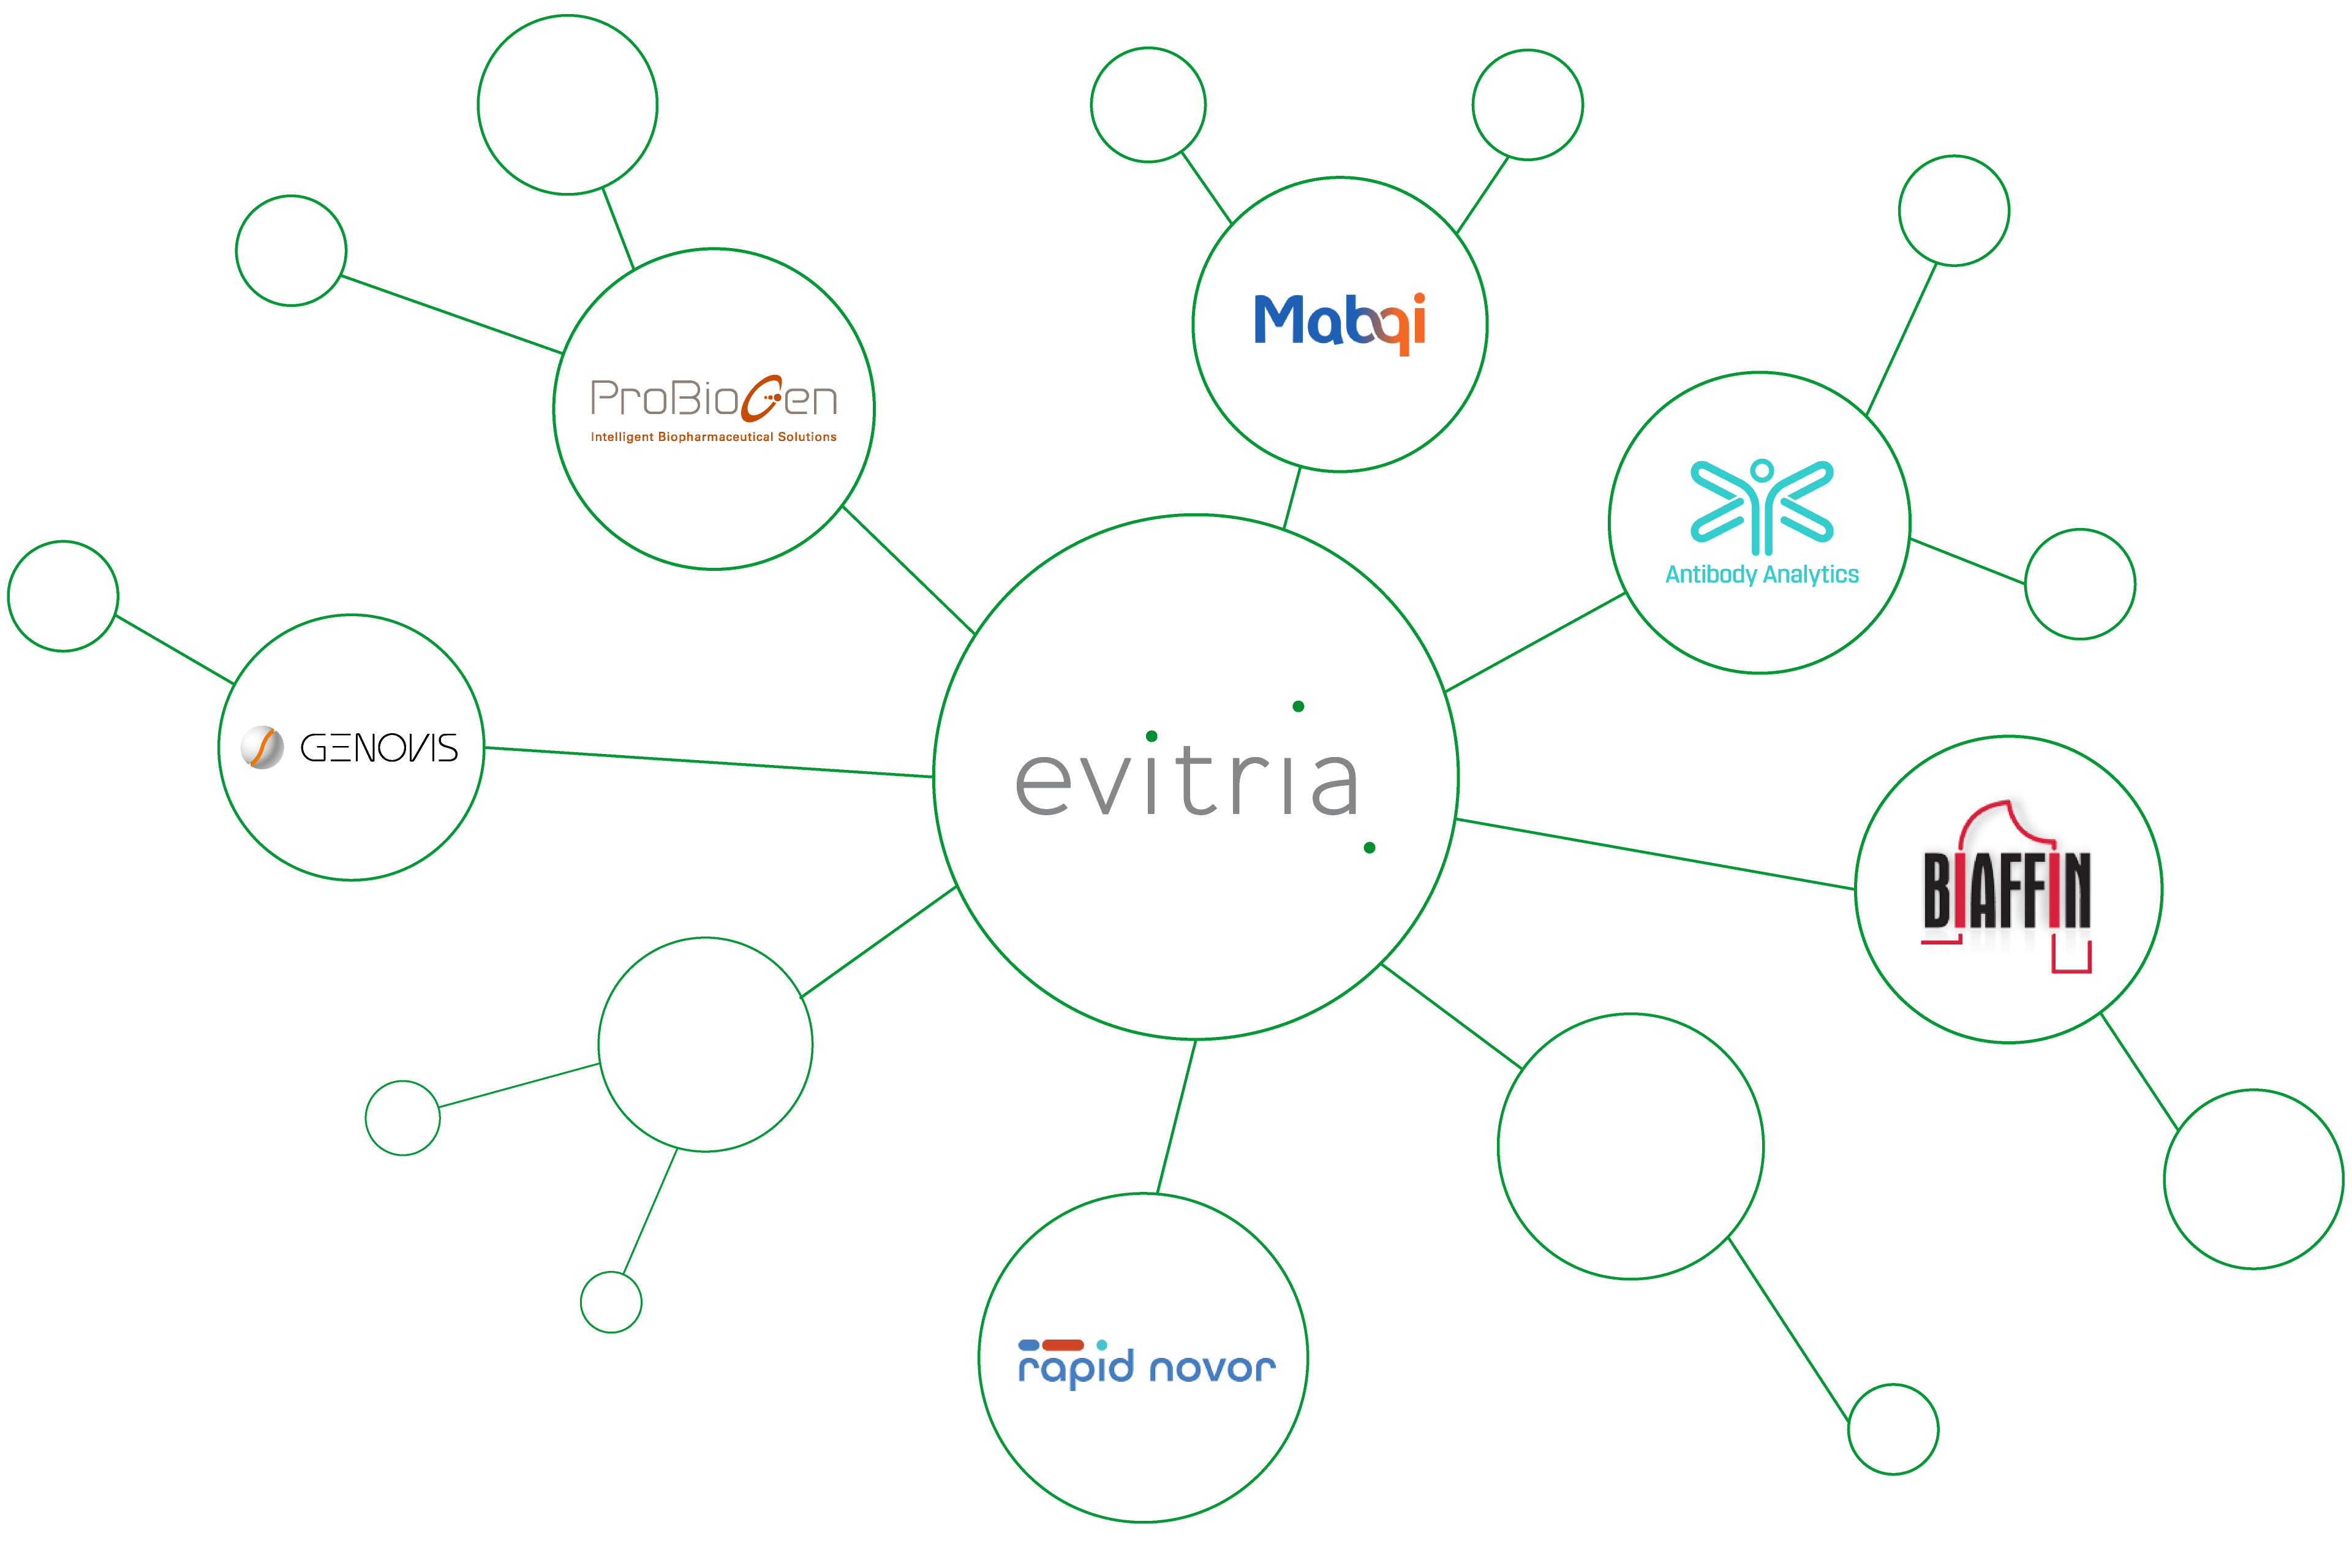 Our expert network - evitria